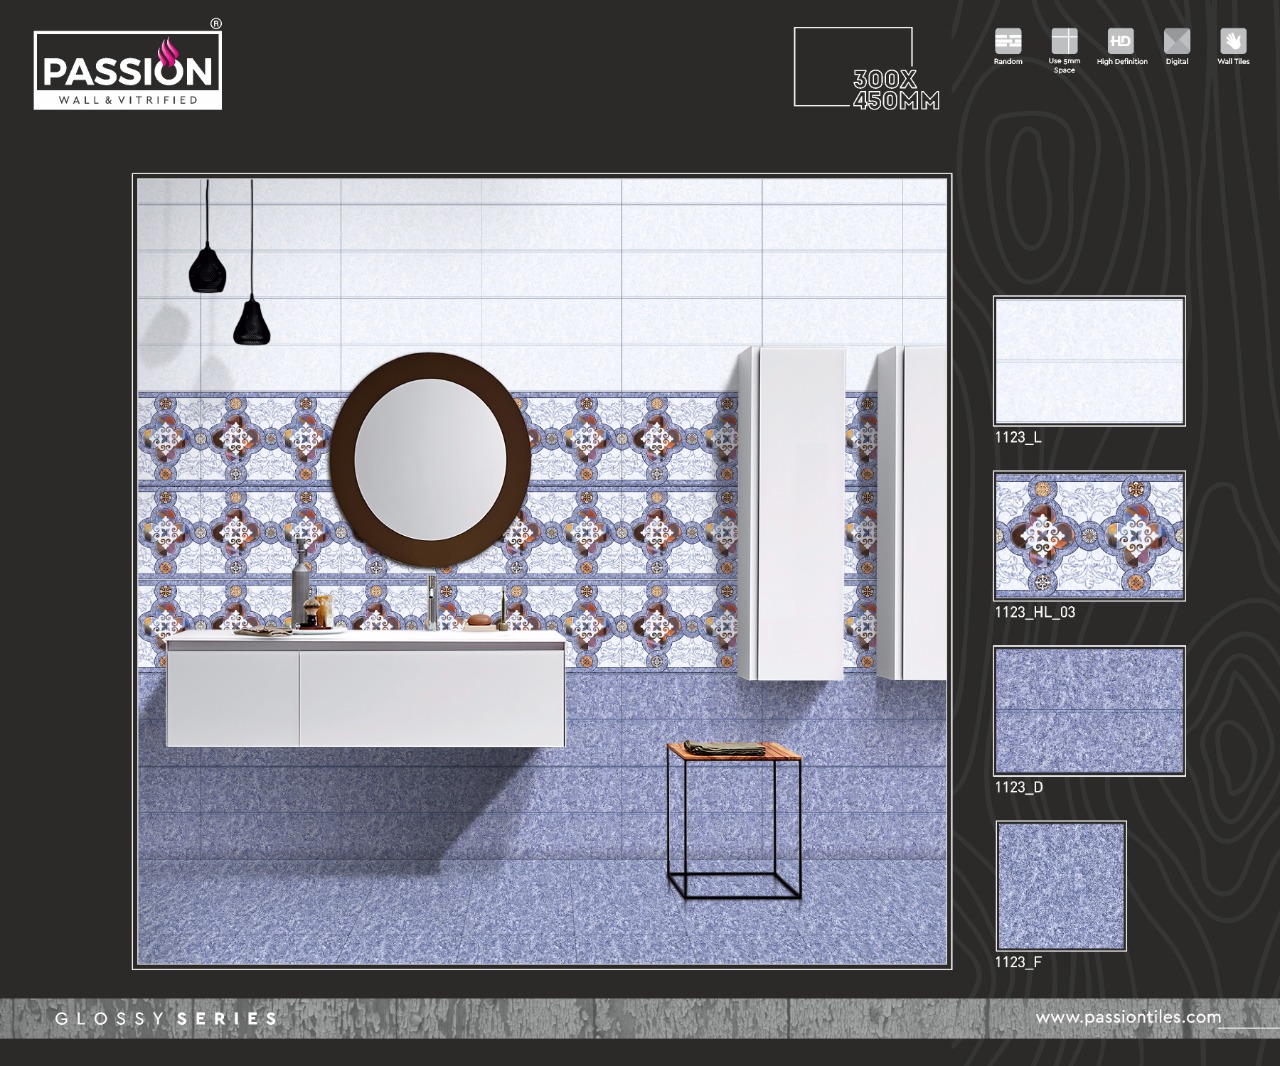 Designer Wall Tiles - Glossy Series from Passion Vitrified